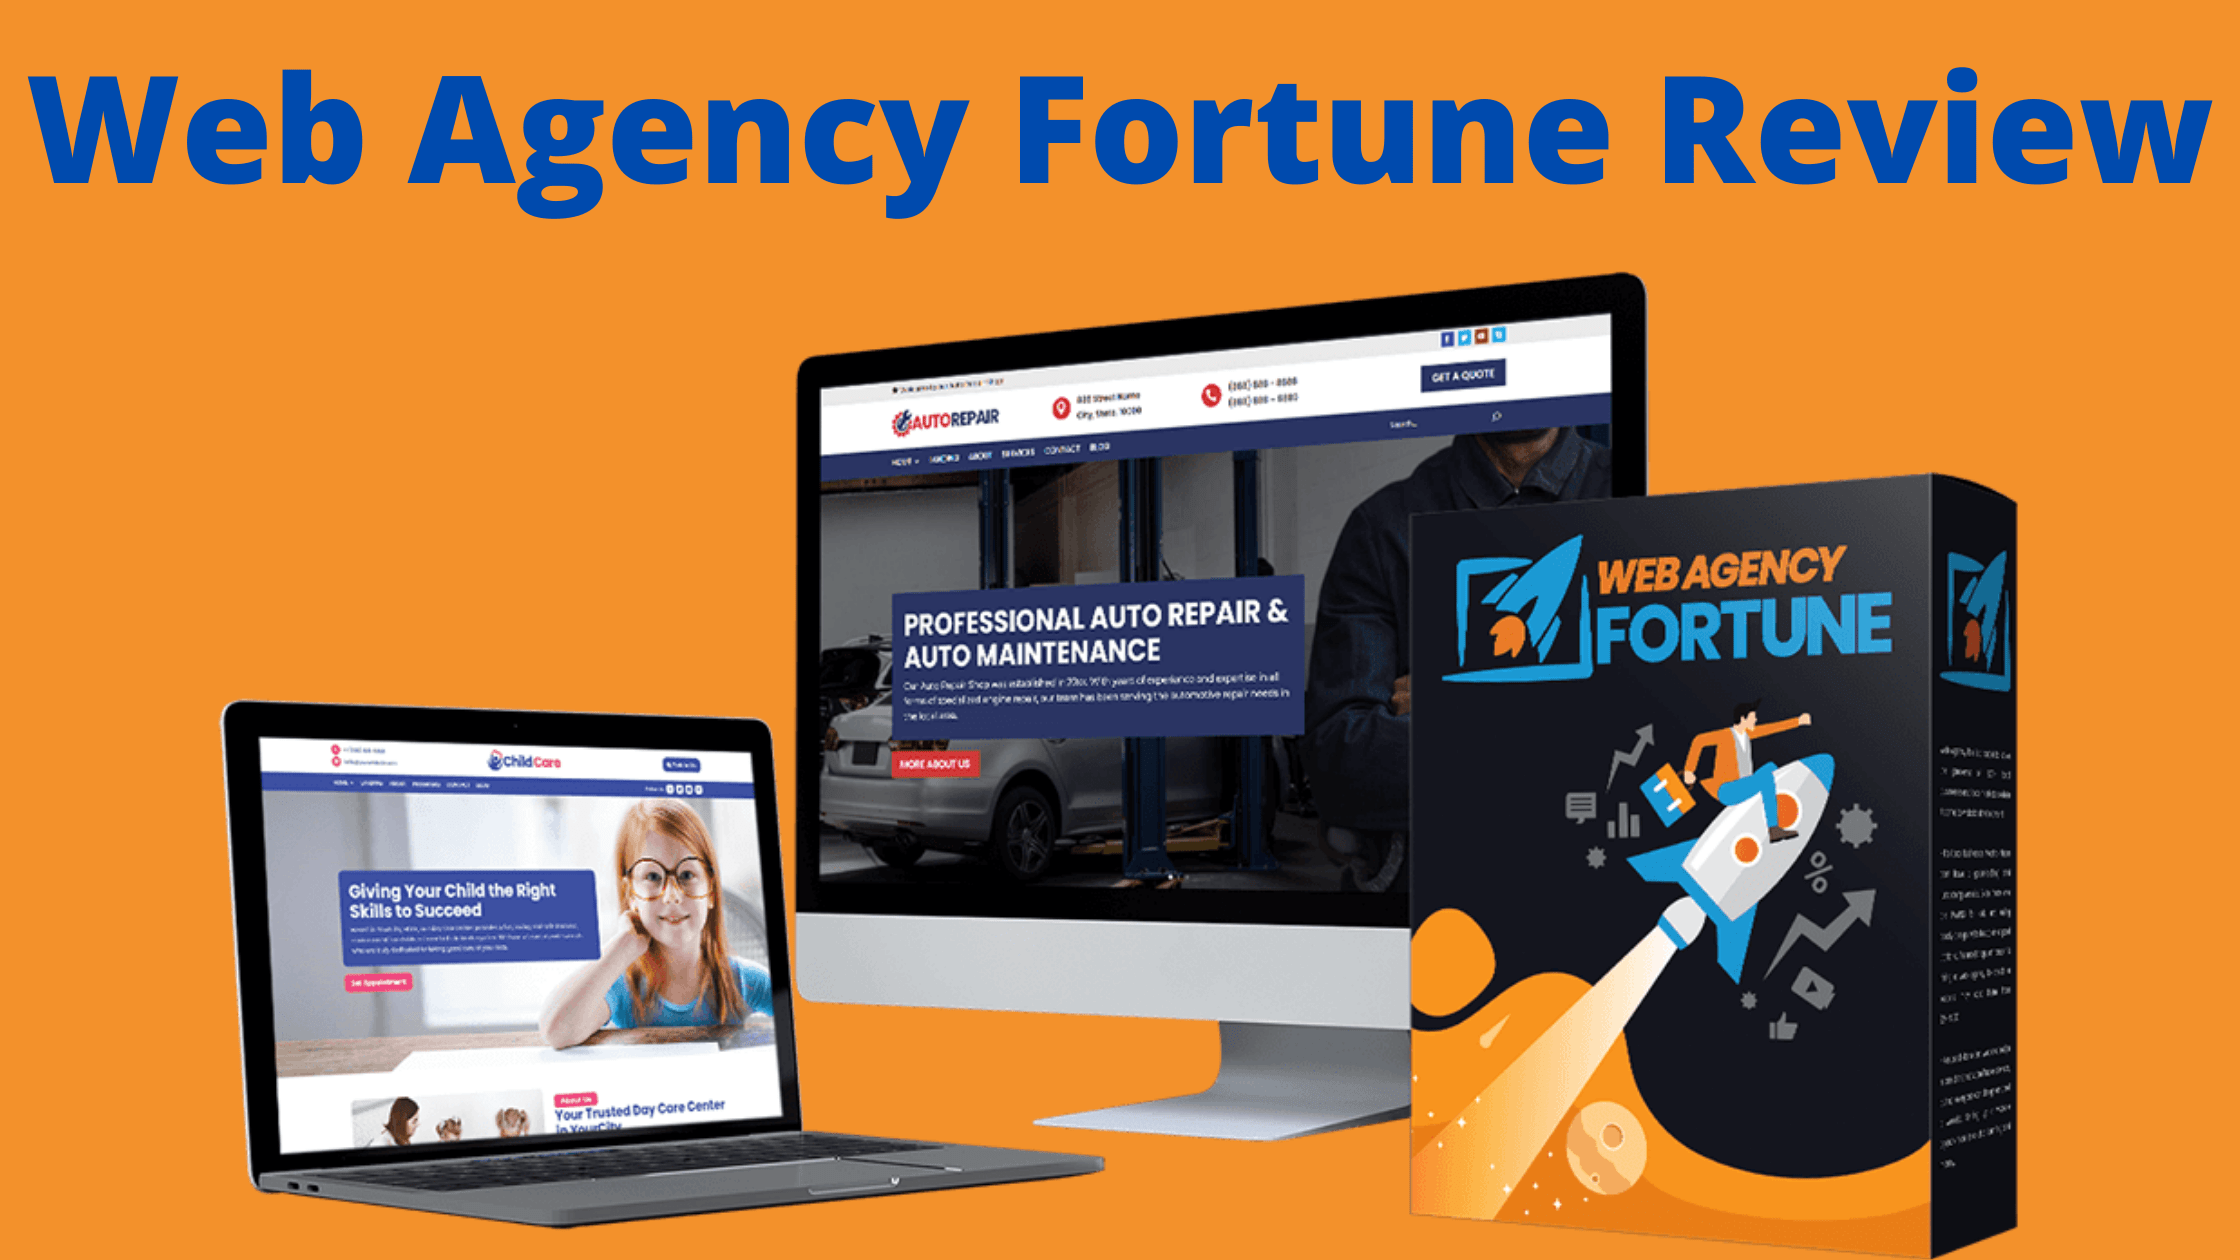 Web Agency Fortune Review